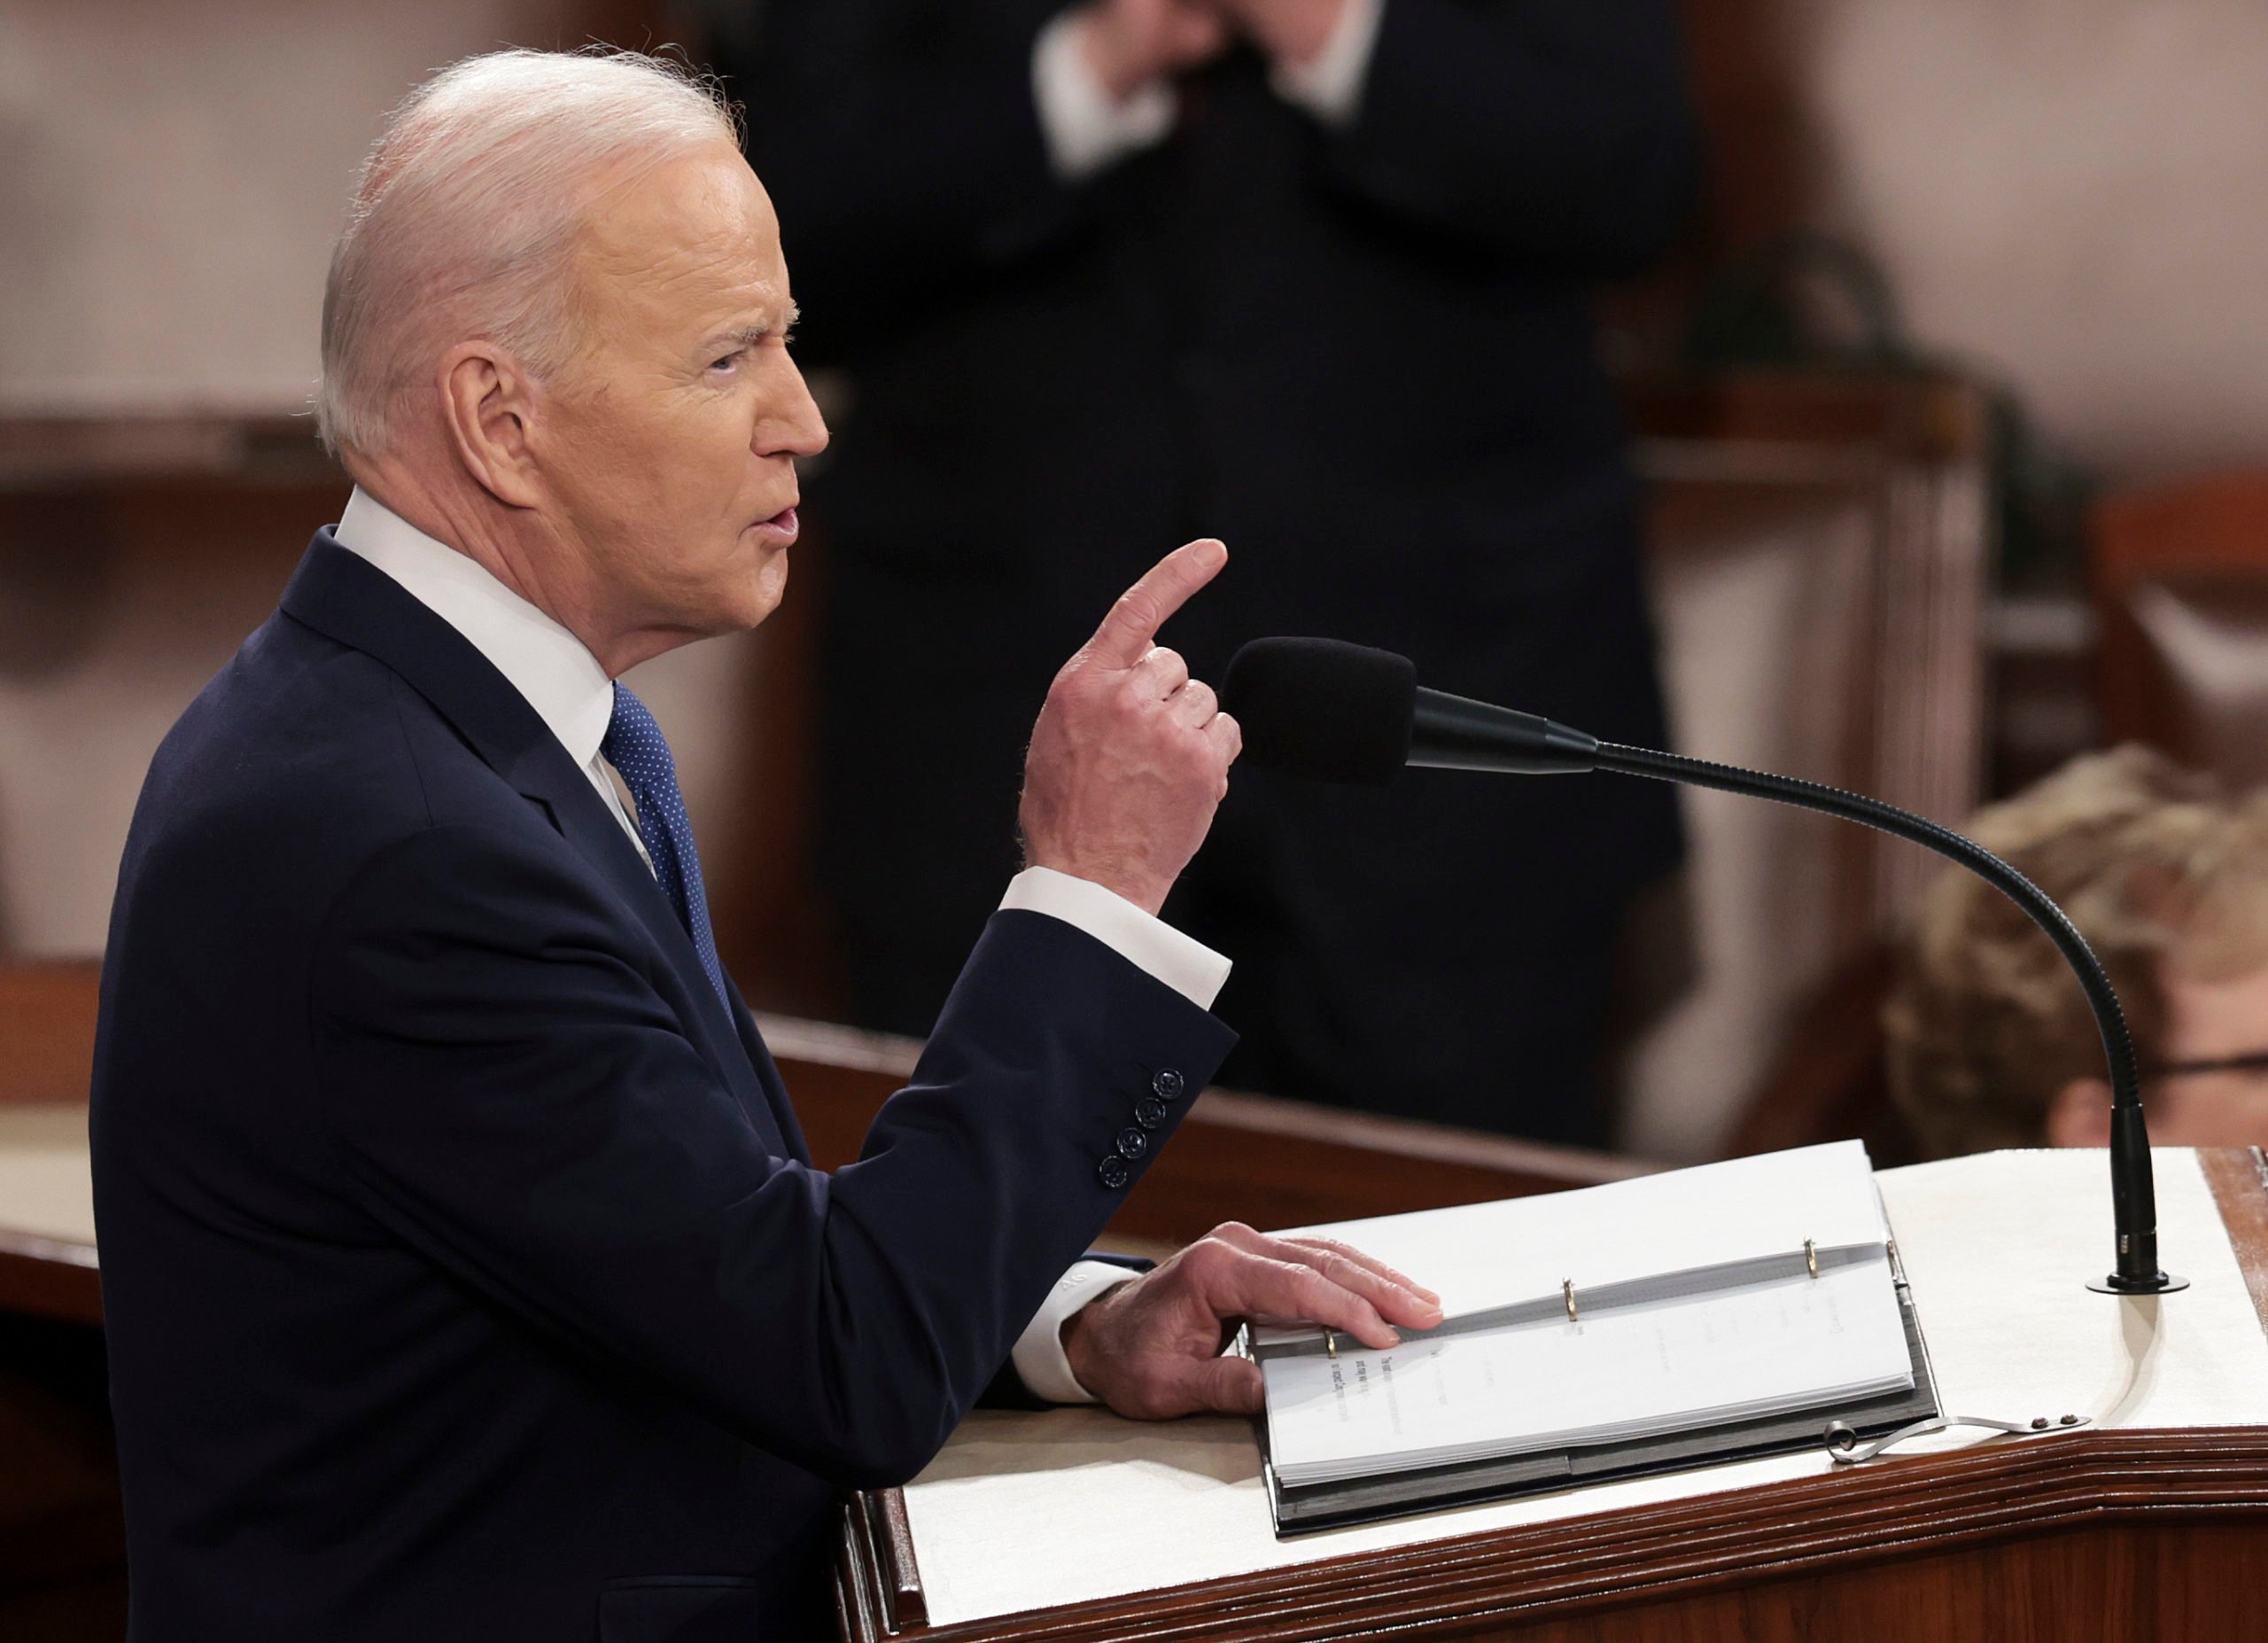 WASHINGTON, DC - MARCH 01: U.S. President Joe Biden delivers the State of the Union address during a joint session of Congress in the U.S. Capitol's House Chamber March 01, 2022 in Washington, DC. During his first State of the Union address Biden spoke on his administration's efforts to lead a global response to the Russian invasion of Ukraine, work to curb inflation and to bring the country out of the COVID-19 pandemic. (Photo by Win McNamee/Getty Images)